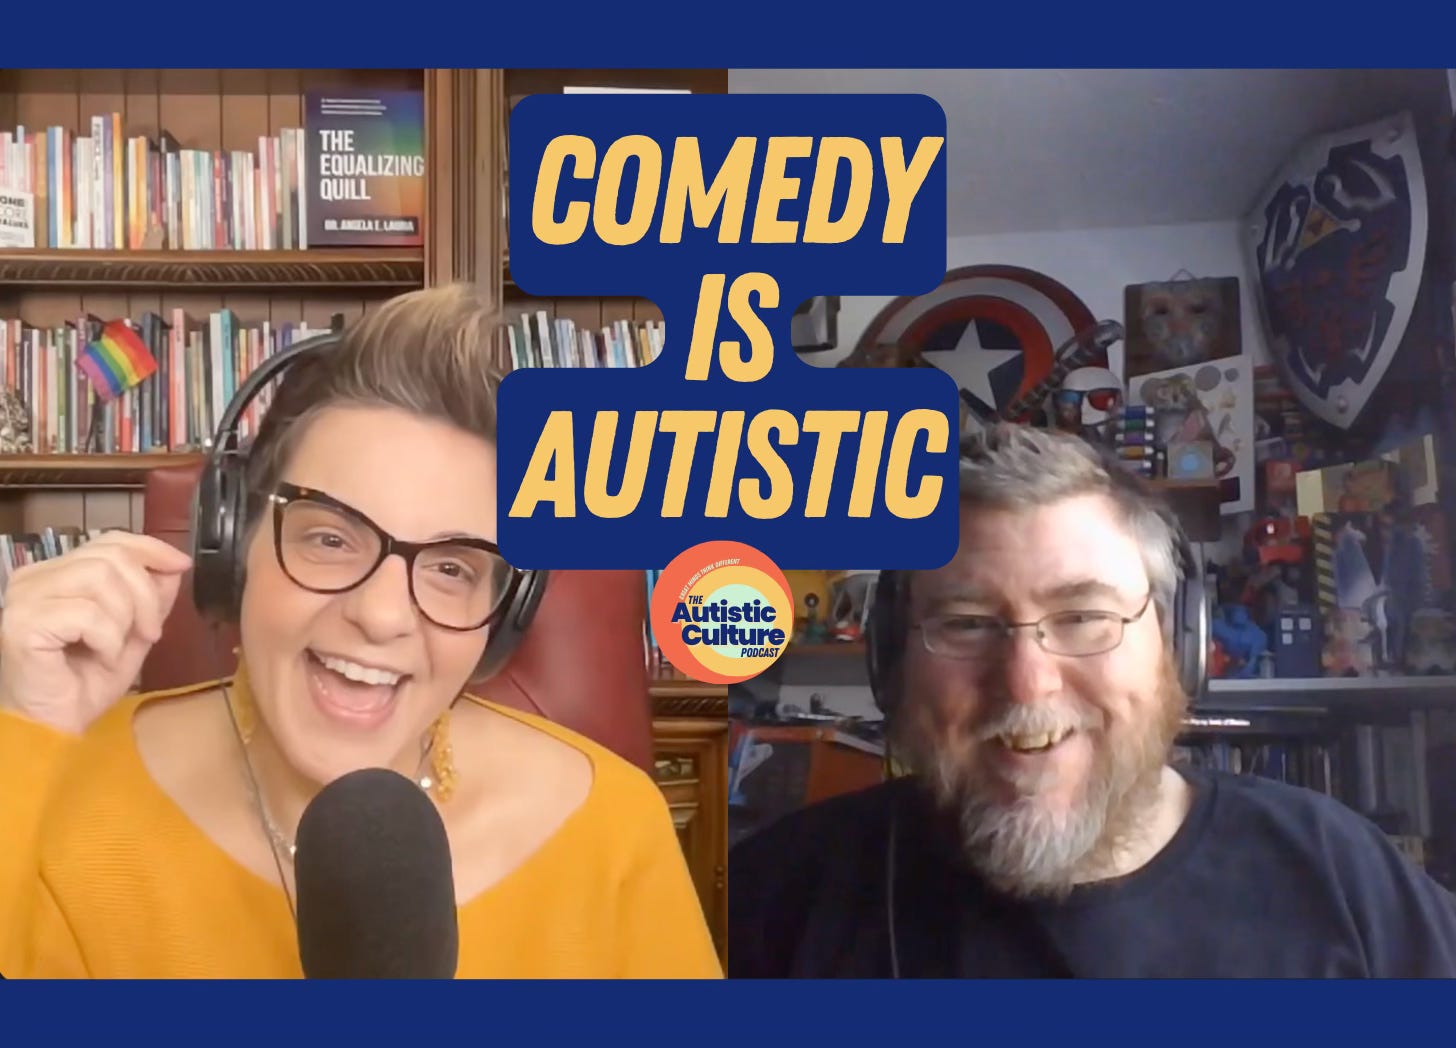 Listen to Autistic podcast hosts discuss: Comedy is Autistic. Hannah Gadsby & Fern Brady - a deep dive on two Autistic comedy icons